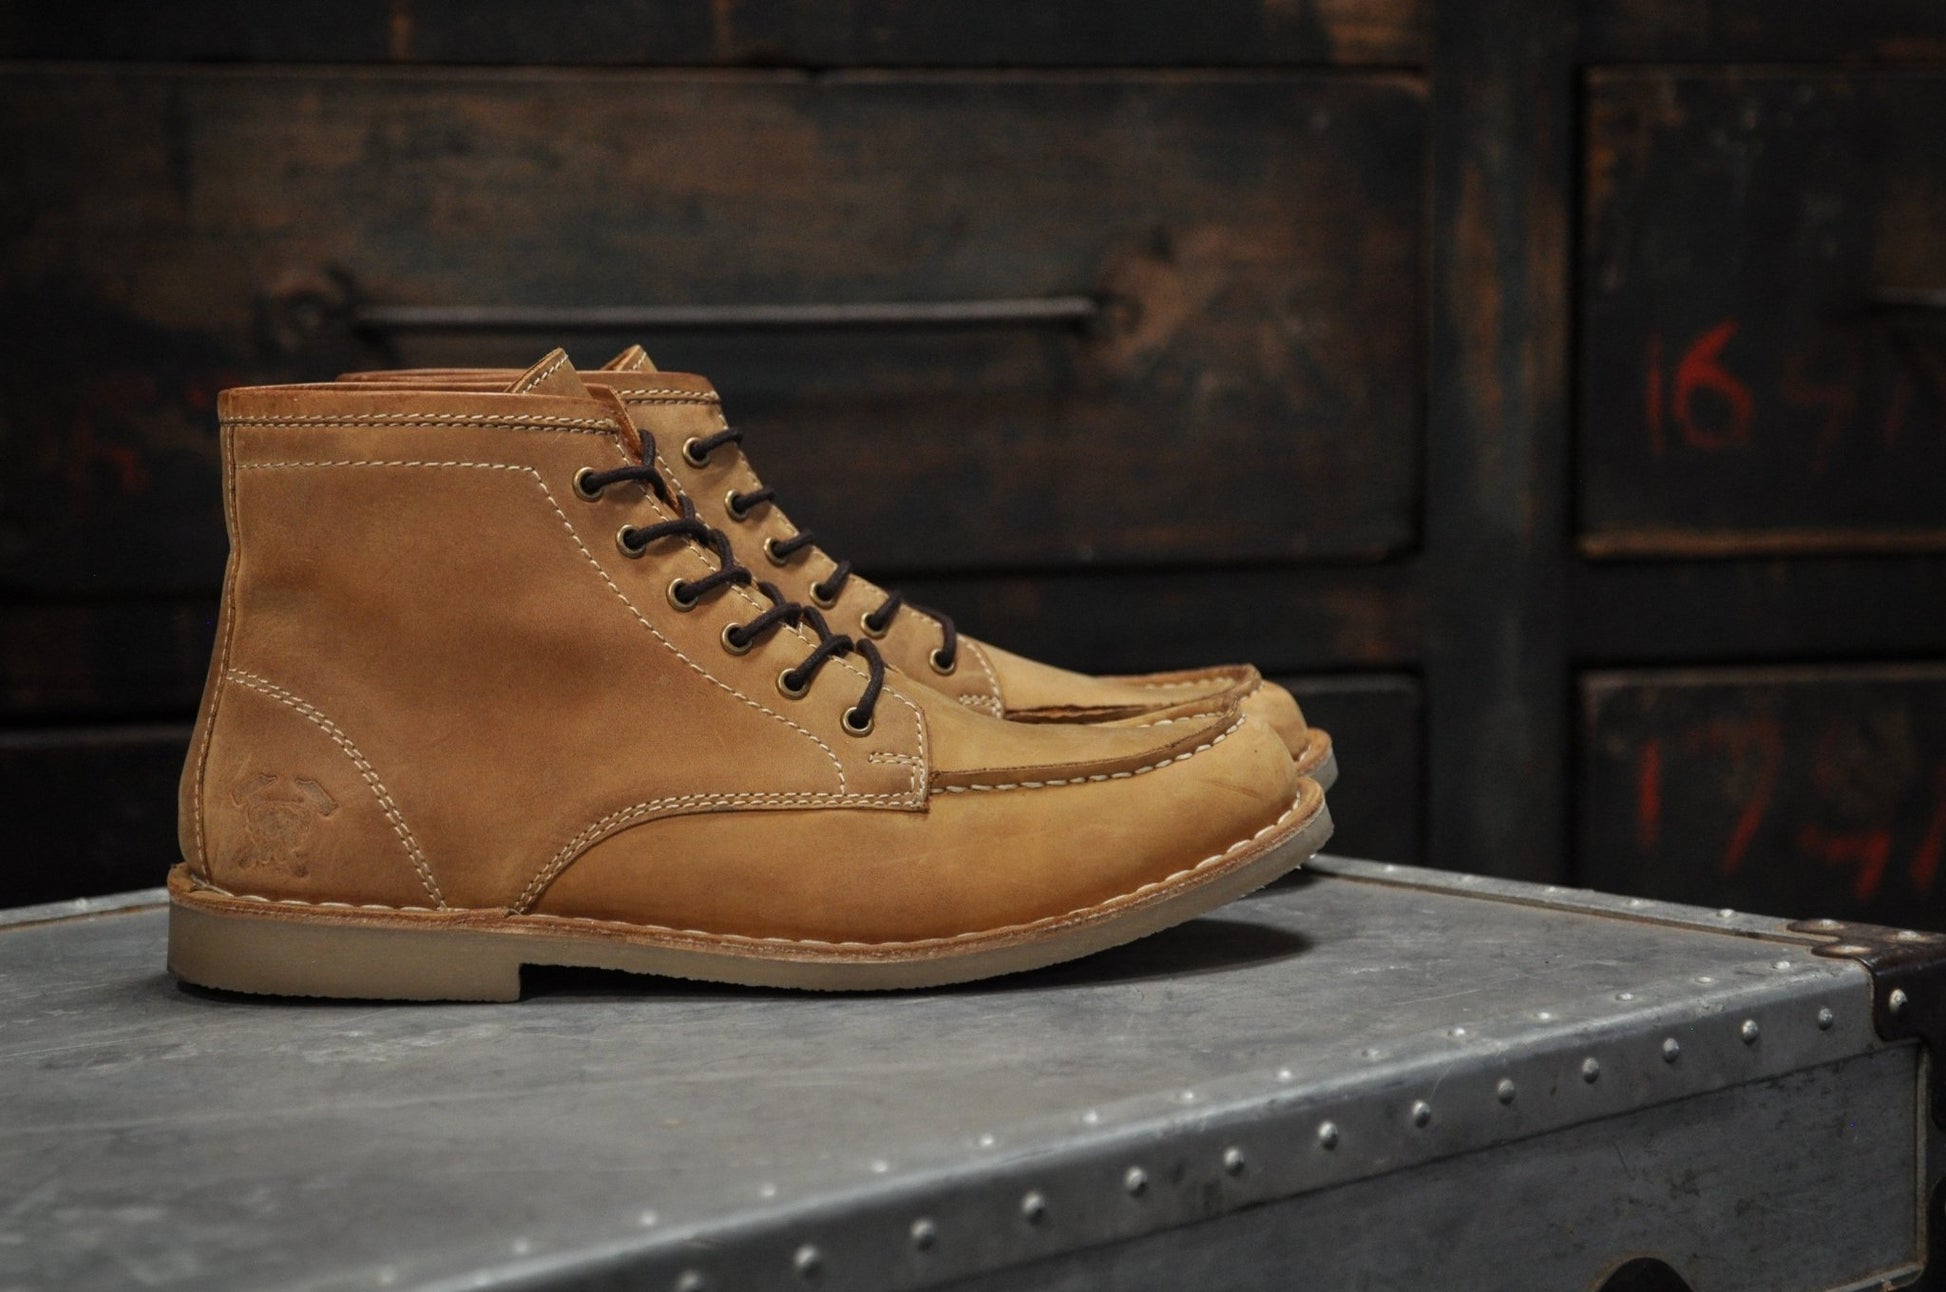 Hound & Hammer The Cooper | Men's Crazy Horse Tan Leather Boots - Men - Footwear - Boots - Ankle Boots - Benn~Burry